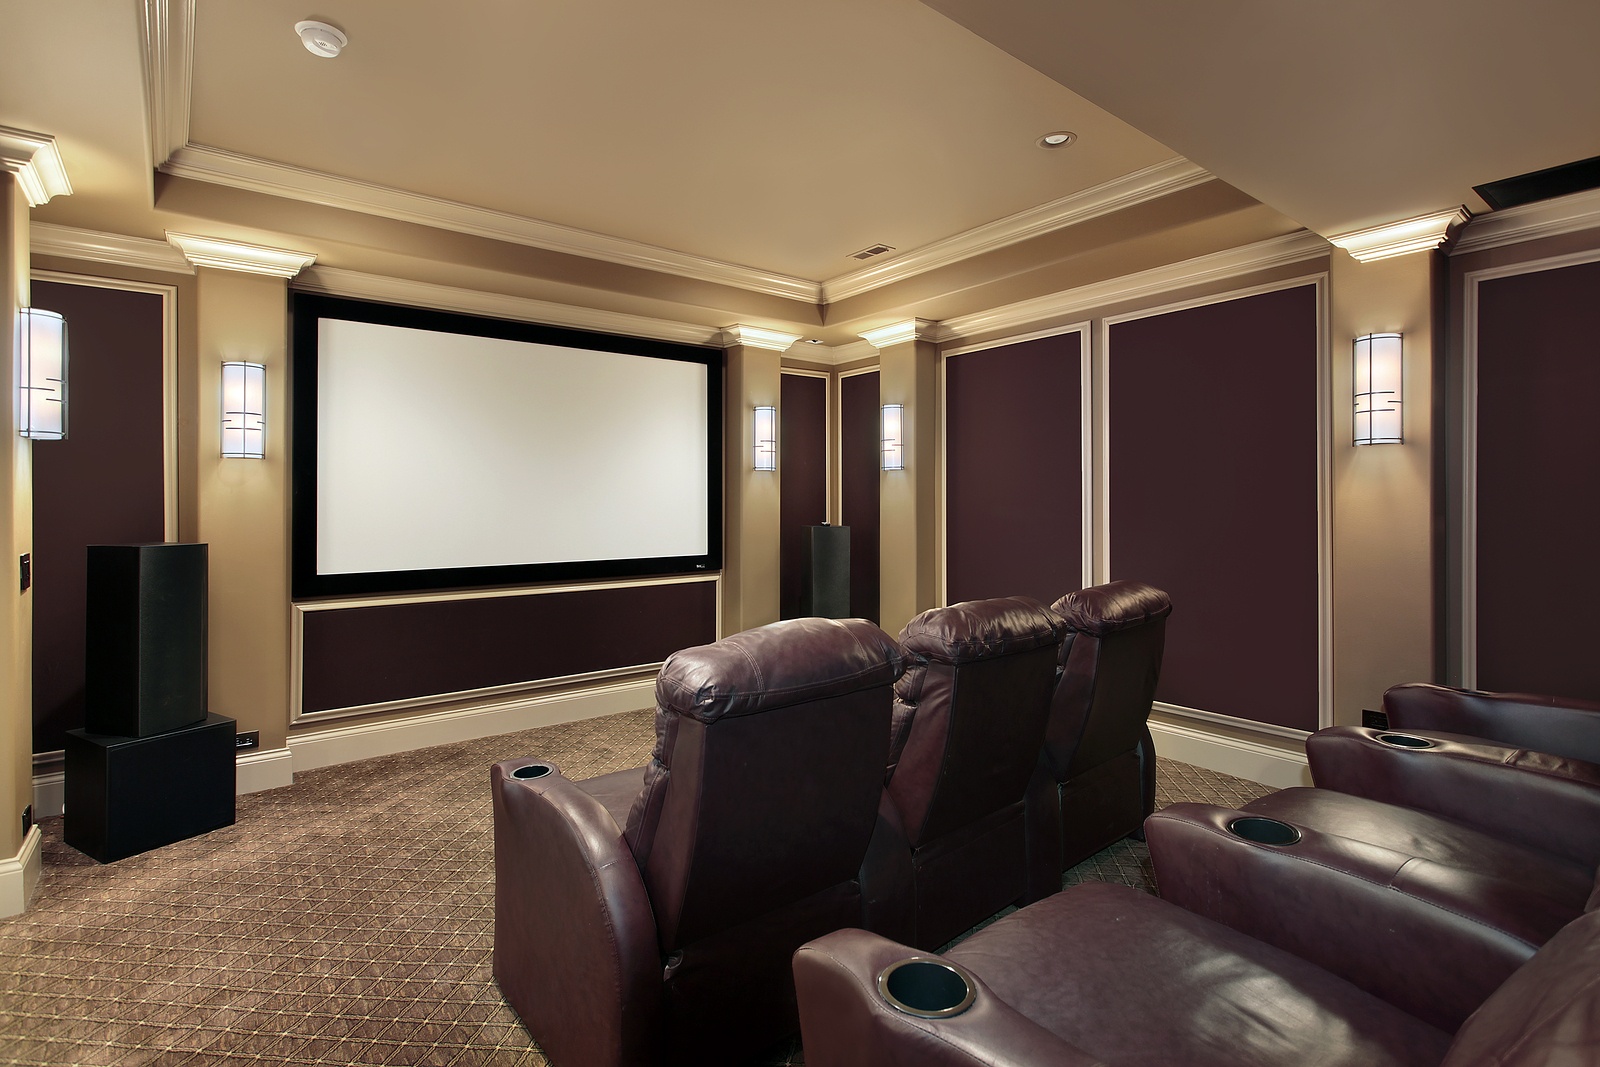 bigstock-Theater-Room-With-Lounge-Chair-7213629.jpg